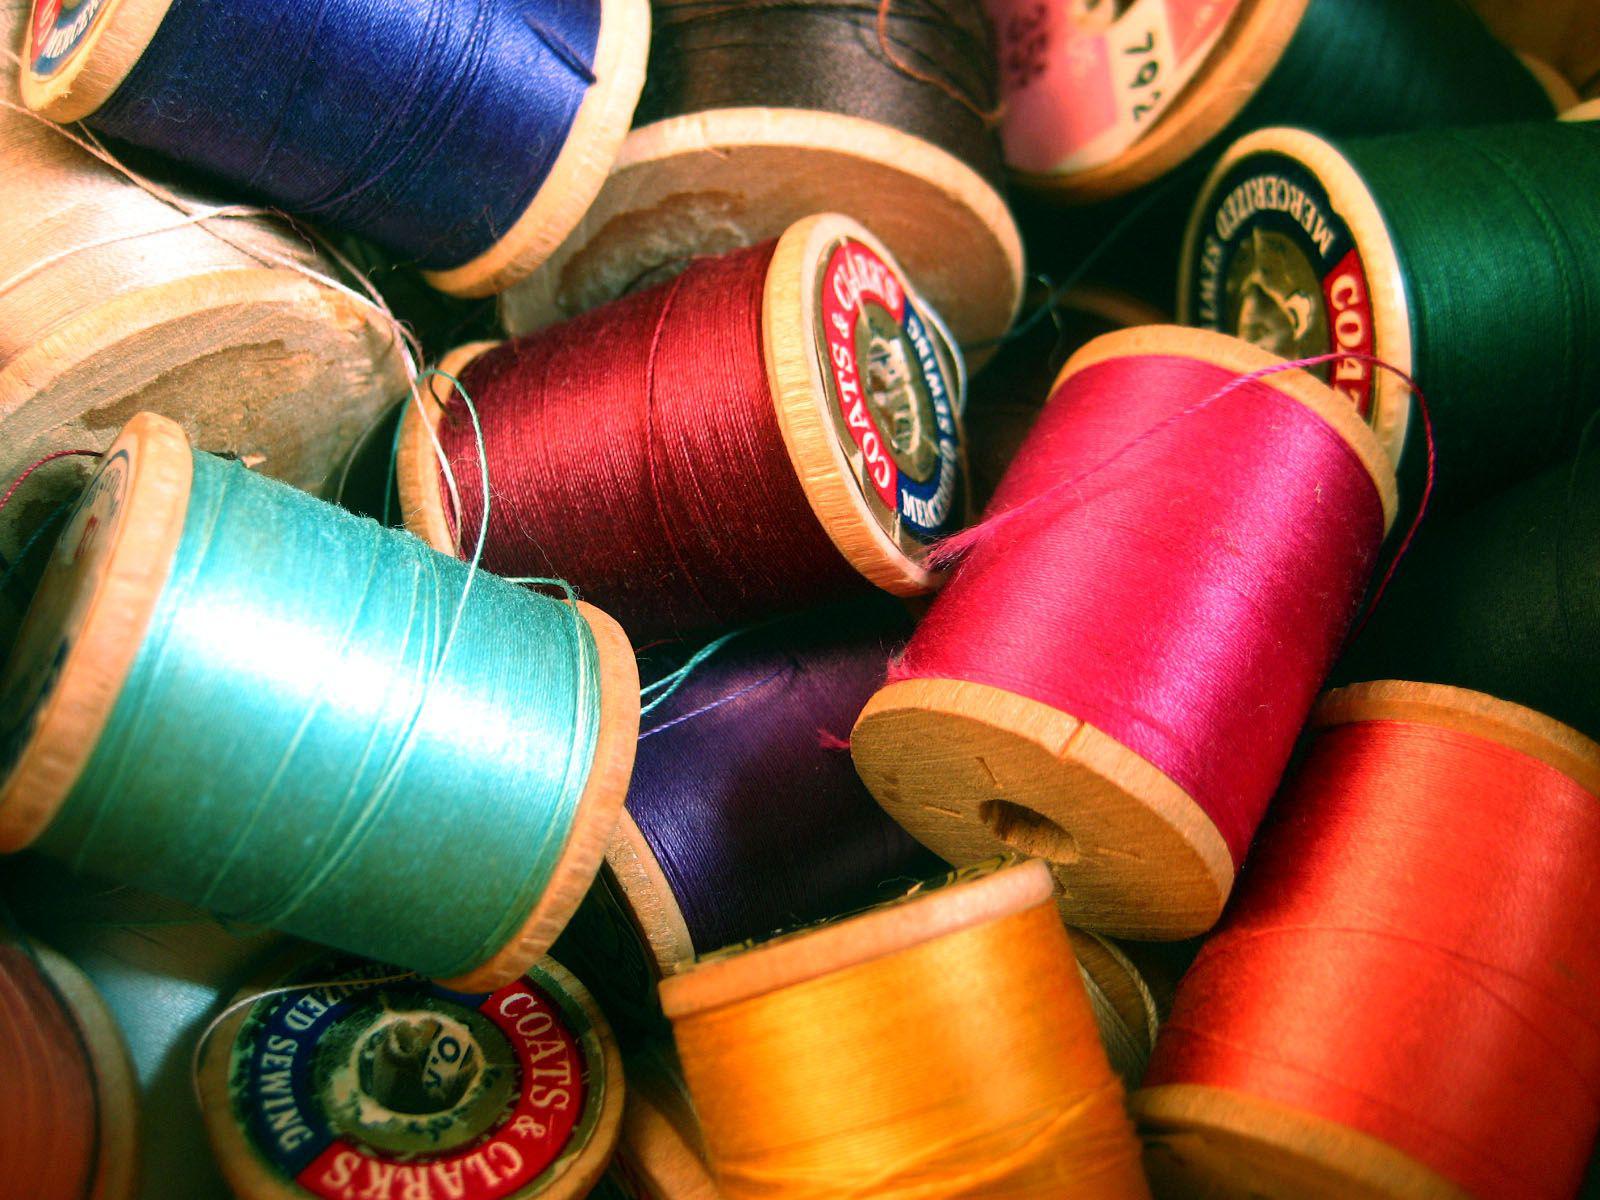 Thread
We offer an abundance of thread for any project! Shop our inventory of embroidery and cotton thread, polyester all purpose threads, Robinson Anton Thread and other notions.

We also carry threads and stabilizers along with embroidery designs.